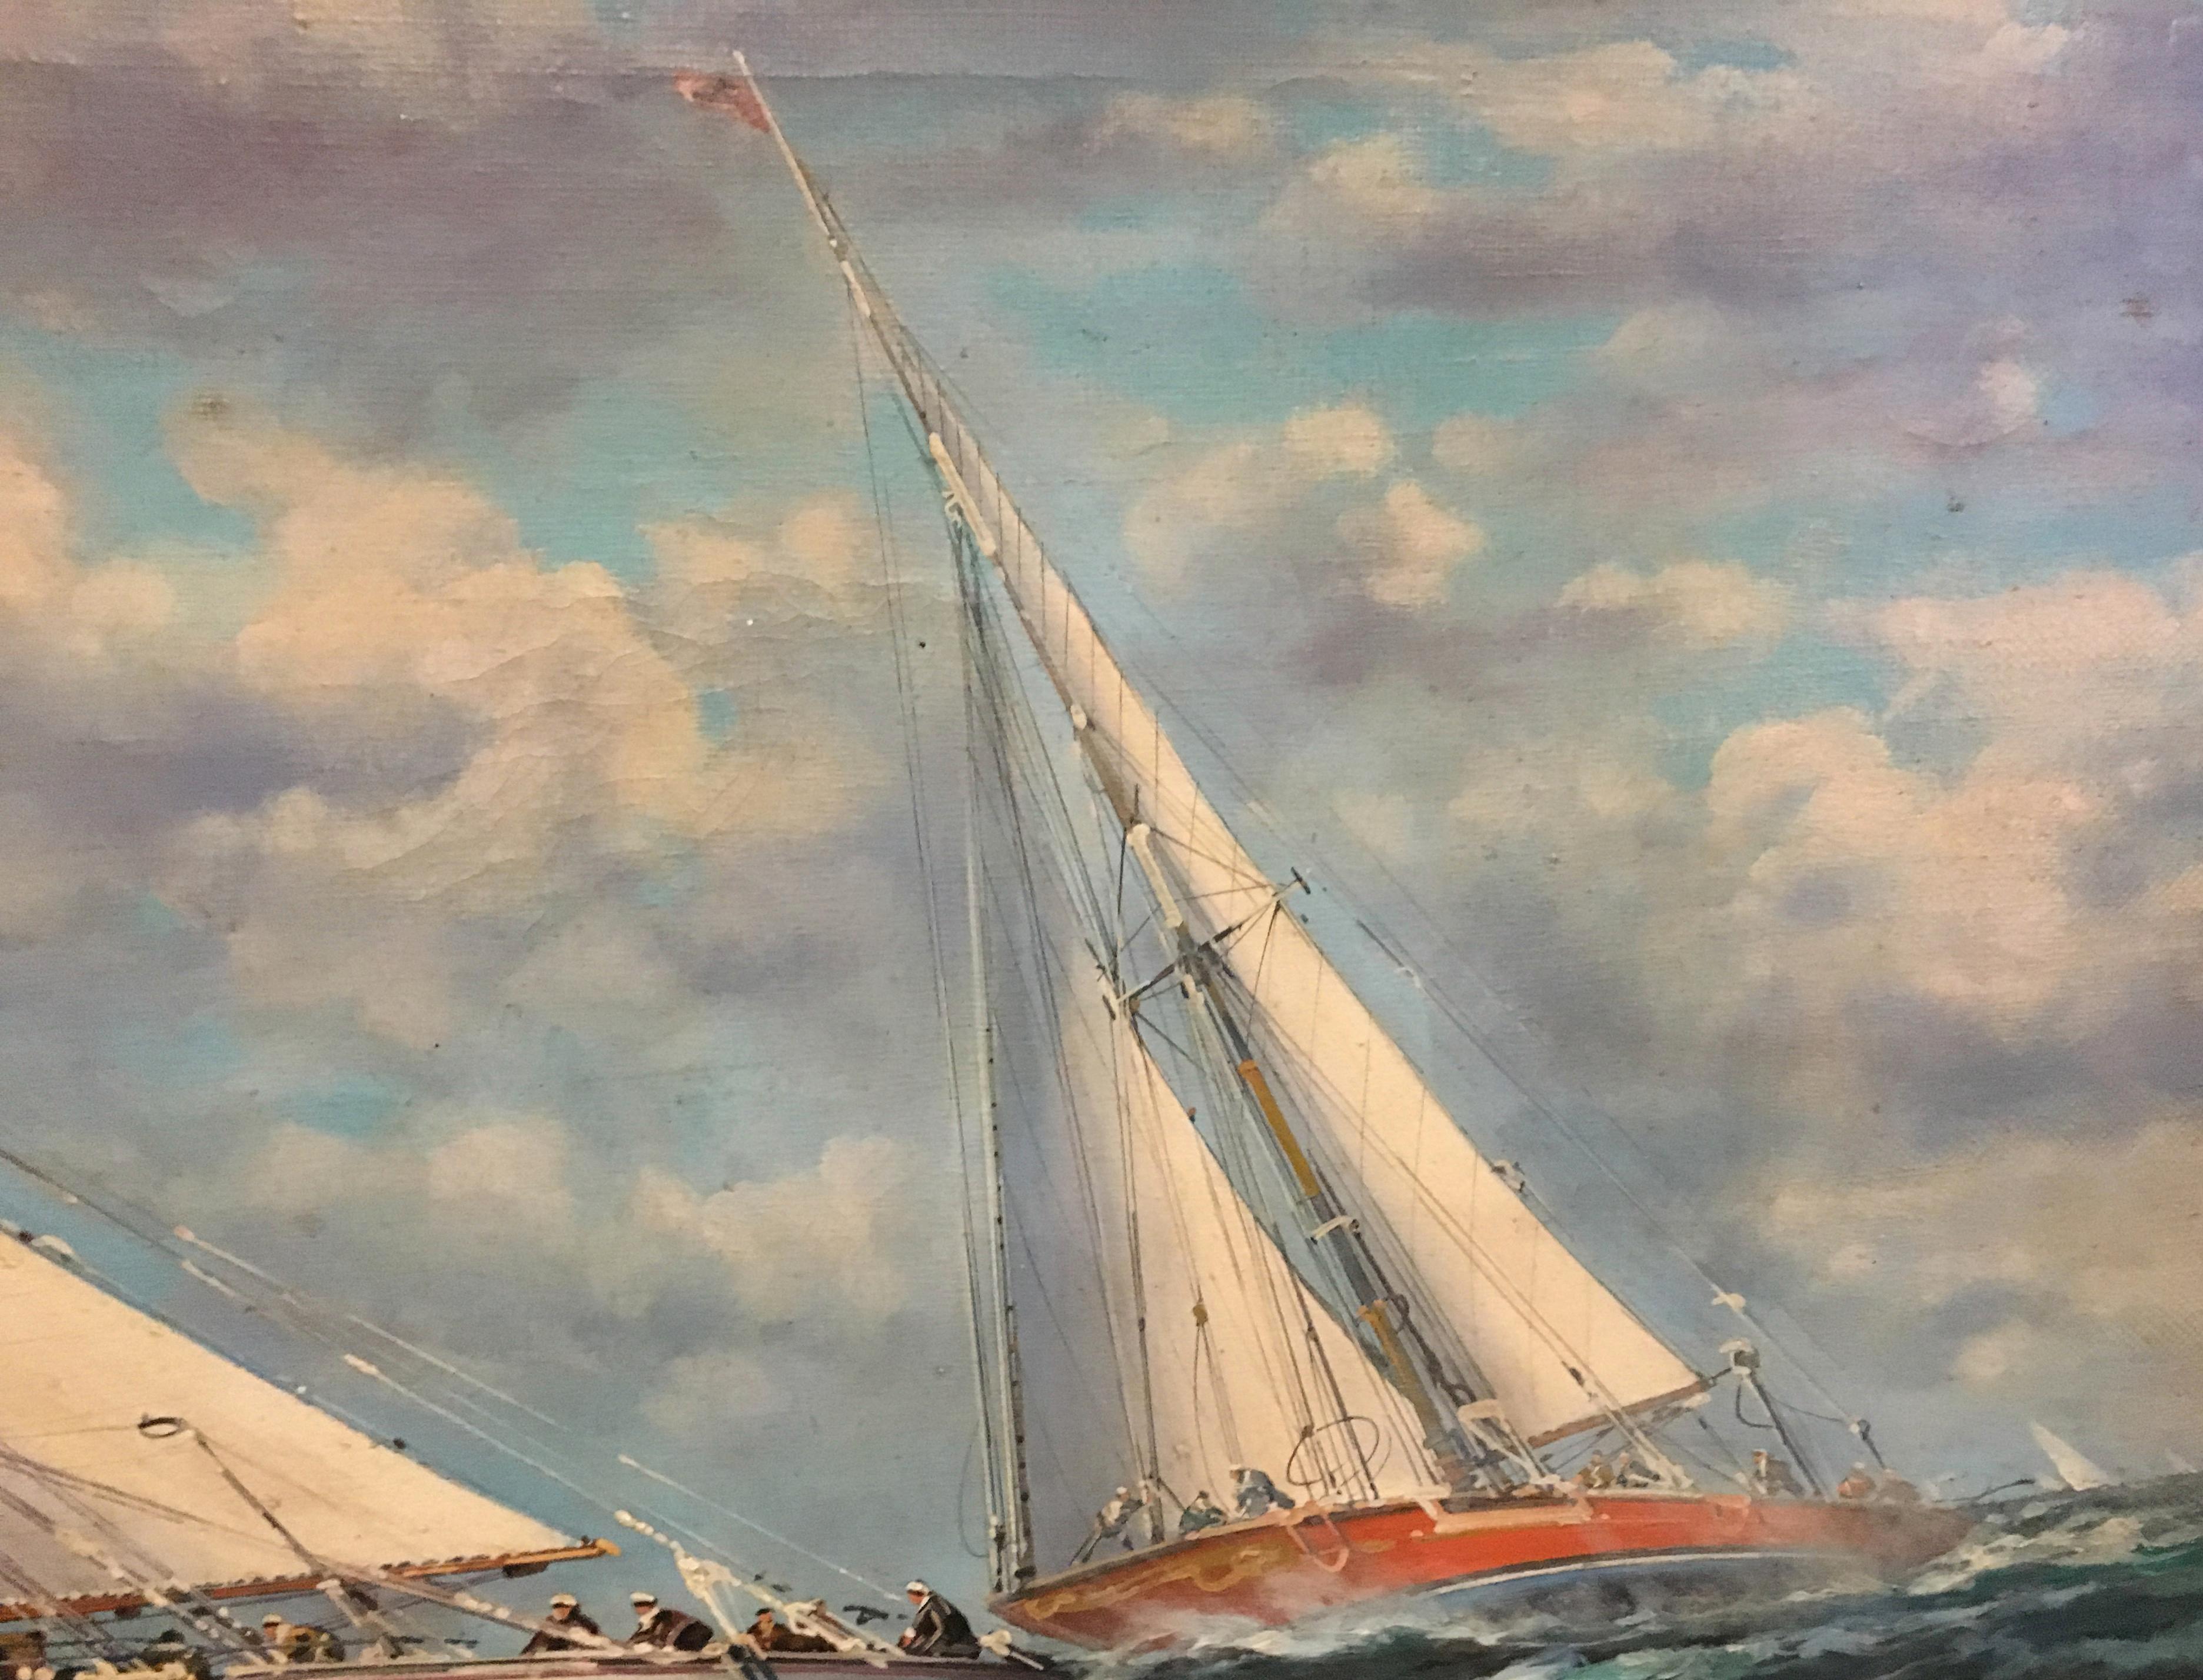 Sailing - John Stevens Italia 2006 - Oil on canvas cm. 60x120.
John Stevens, using subtle washes of oil paint, slowly builds his highly detailed paintings of sea battle scenes and rolling sails. 
He took inspiration for his paintings from Master Tim